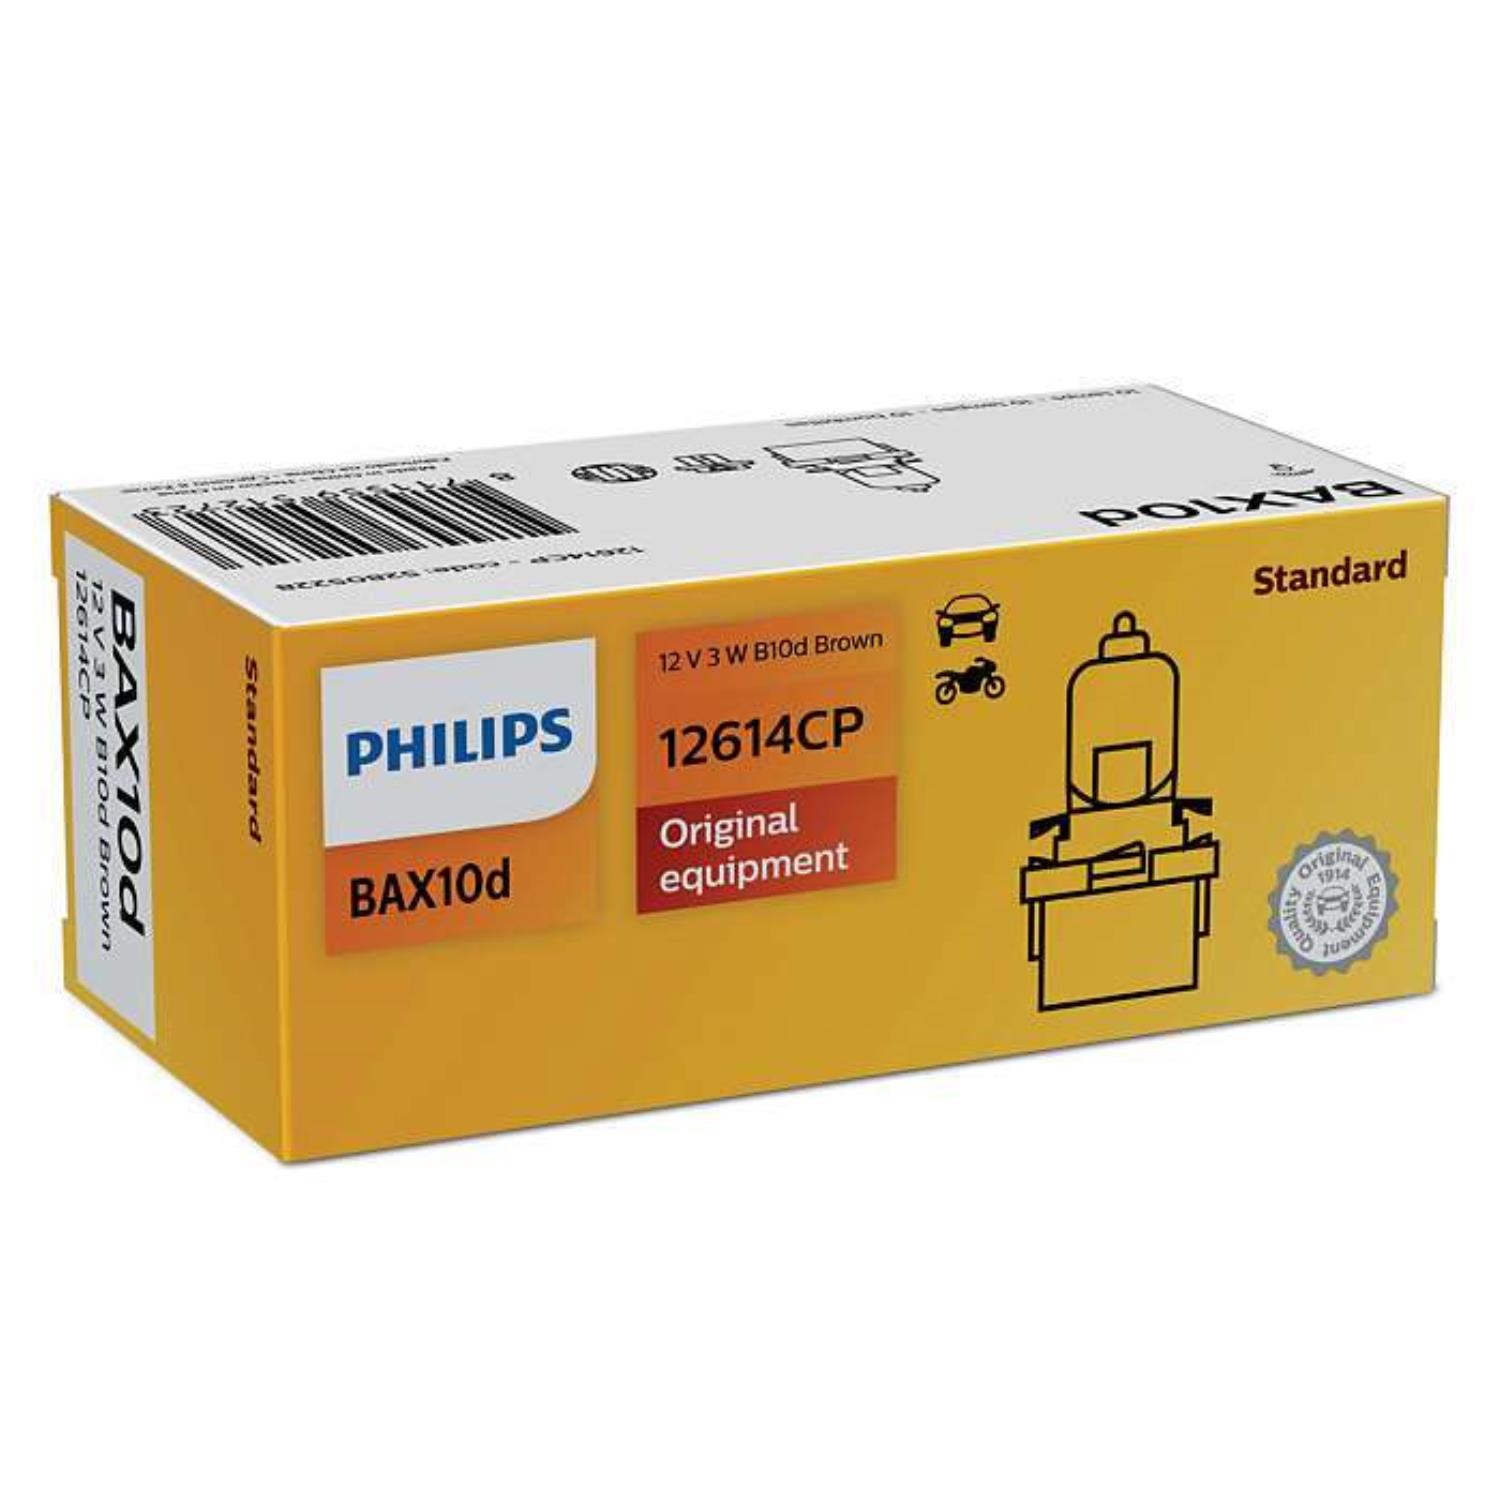 PHILIPS 12614CP Glühlampe Beleuchtung